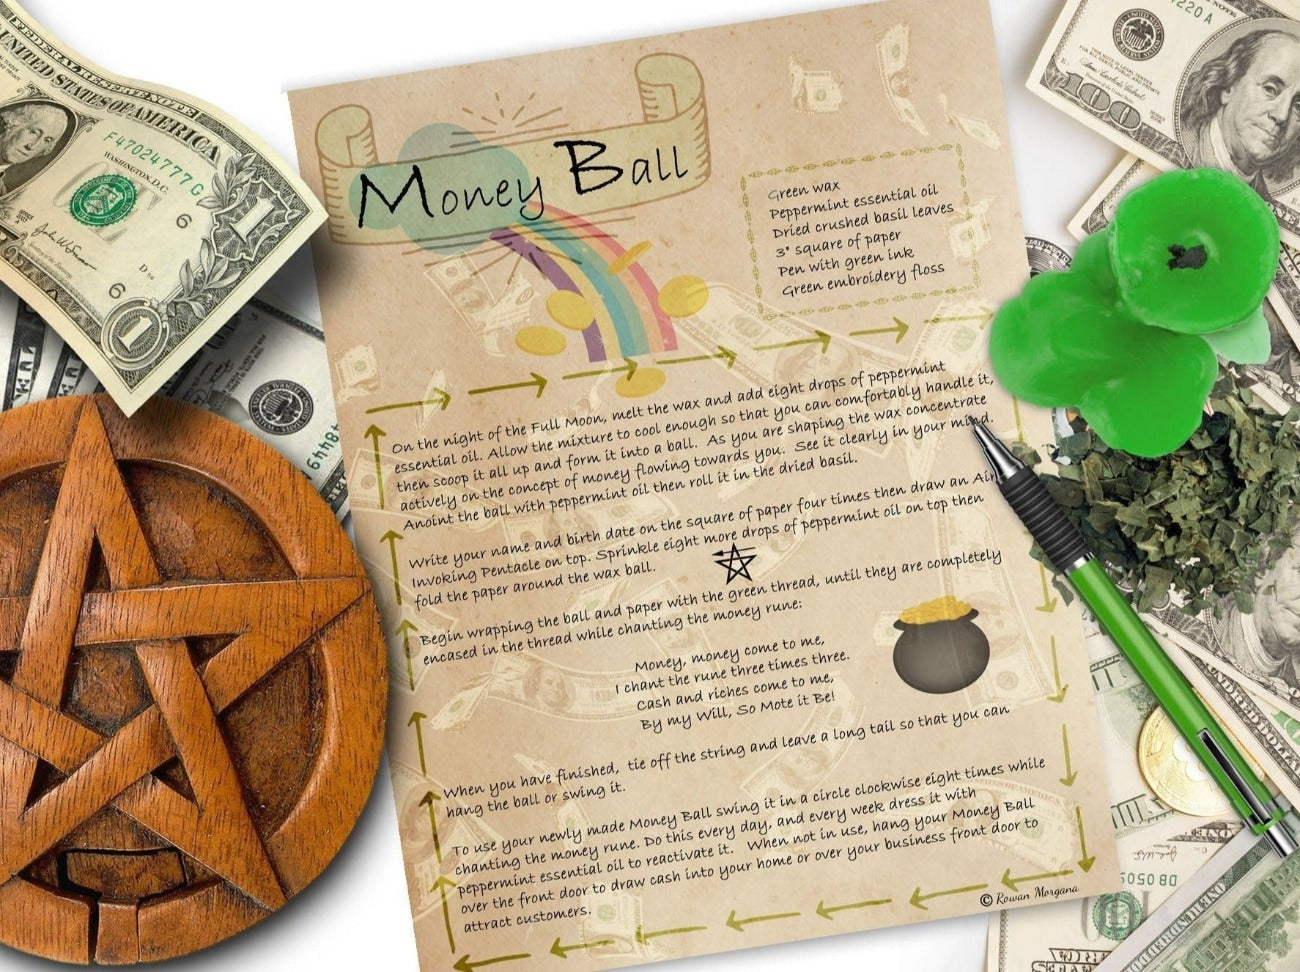 MONEY BALL a Spell of Riches, Melted Wax Spell for Prosperity, Wicca Candle Magic - Morgana Magick Spell